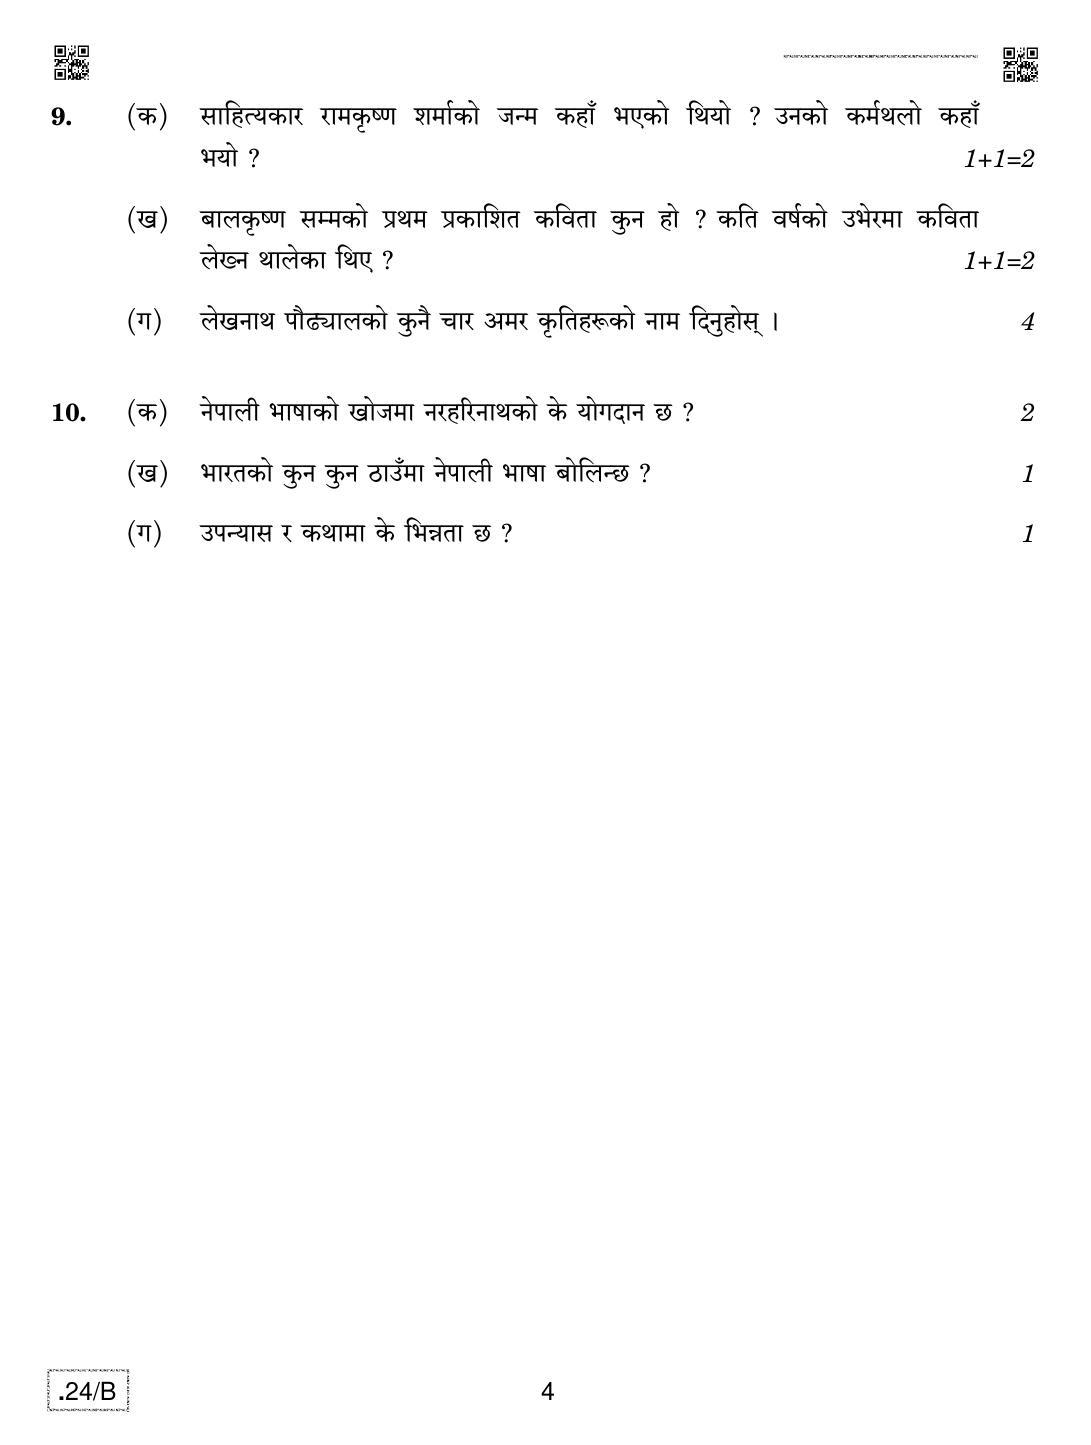 CBSE Class 12 Nepali 2020 Compartment Question Paper - Page 4